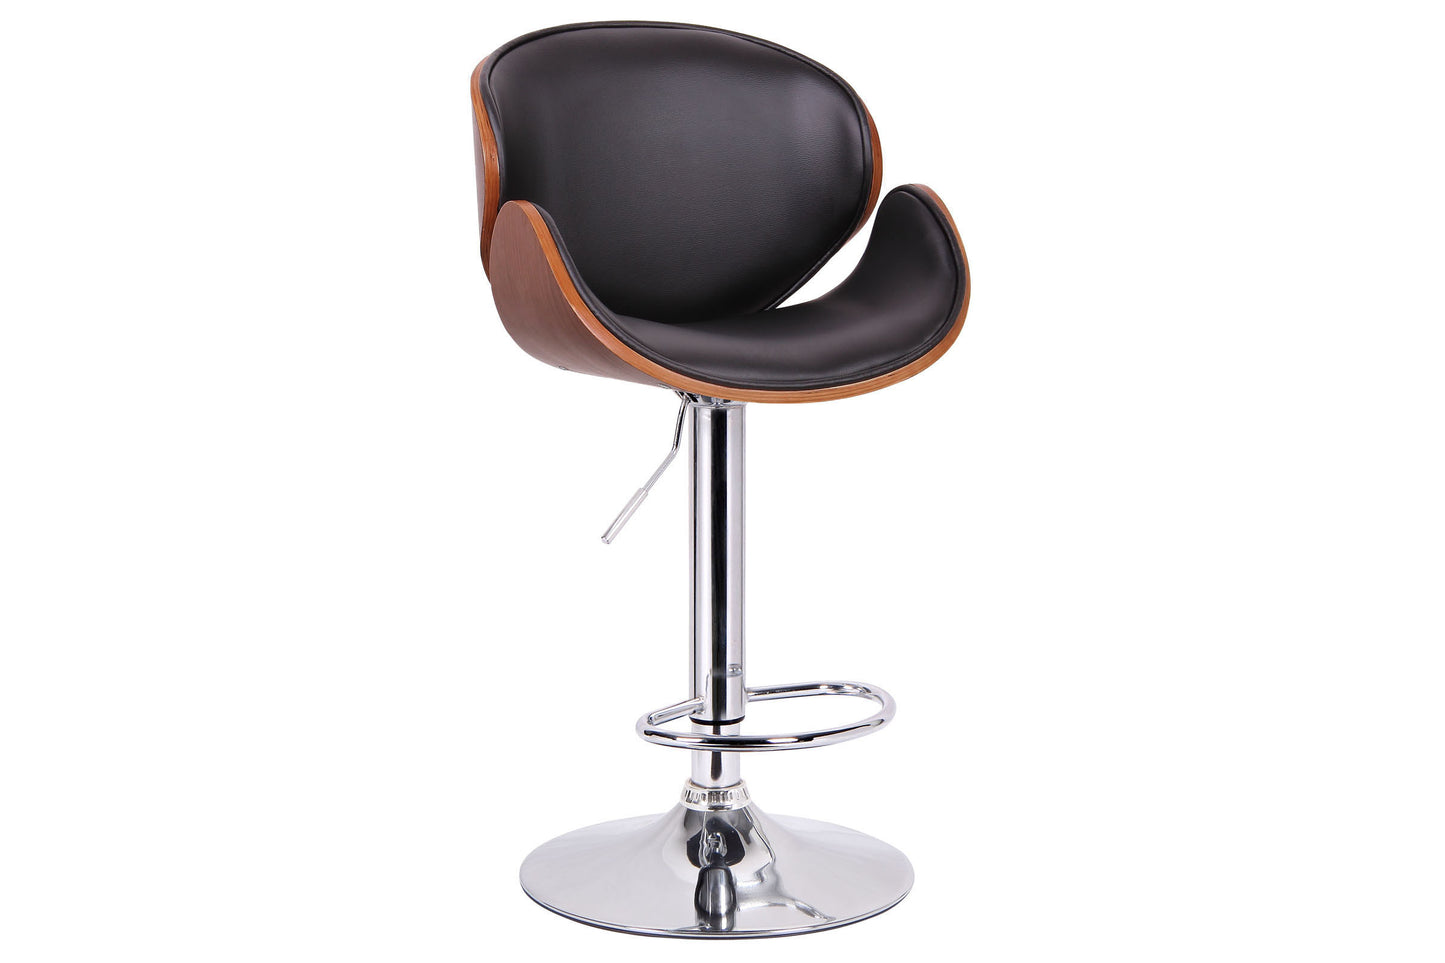 Contemporary Leatherette & Chrome Bar Stool in Walnut Brown & Black bxi4216-80